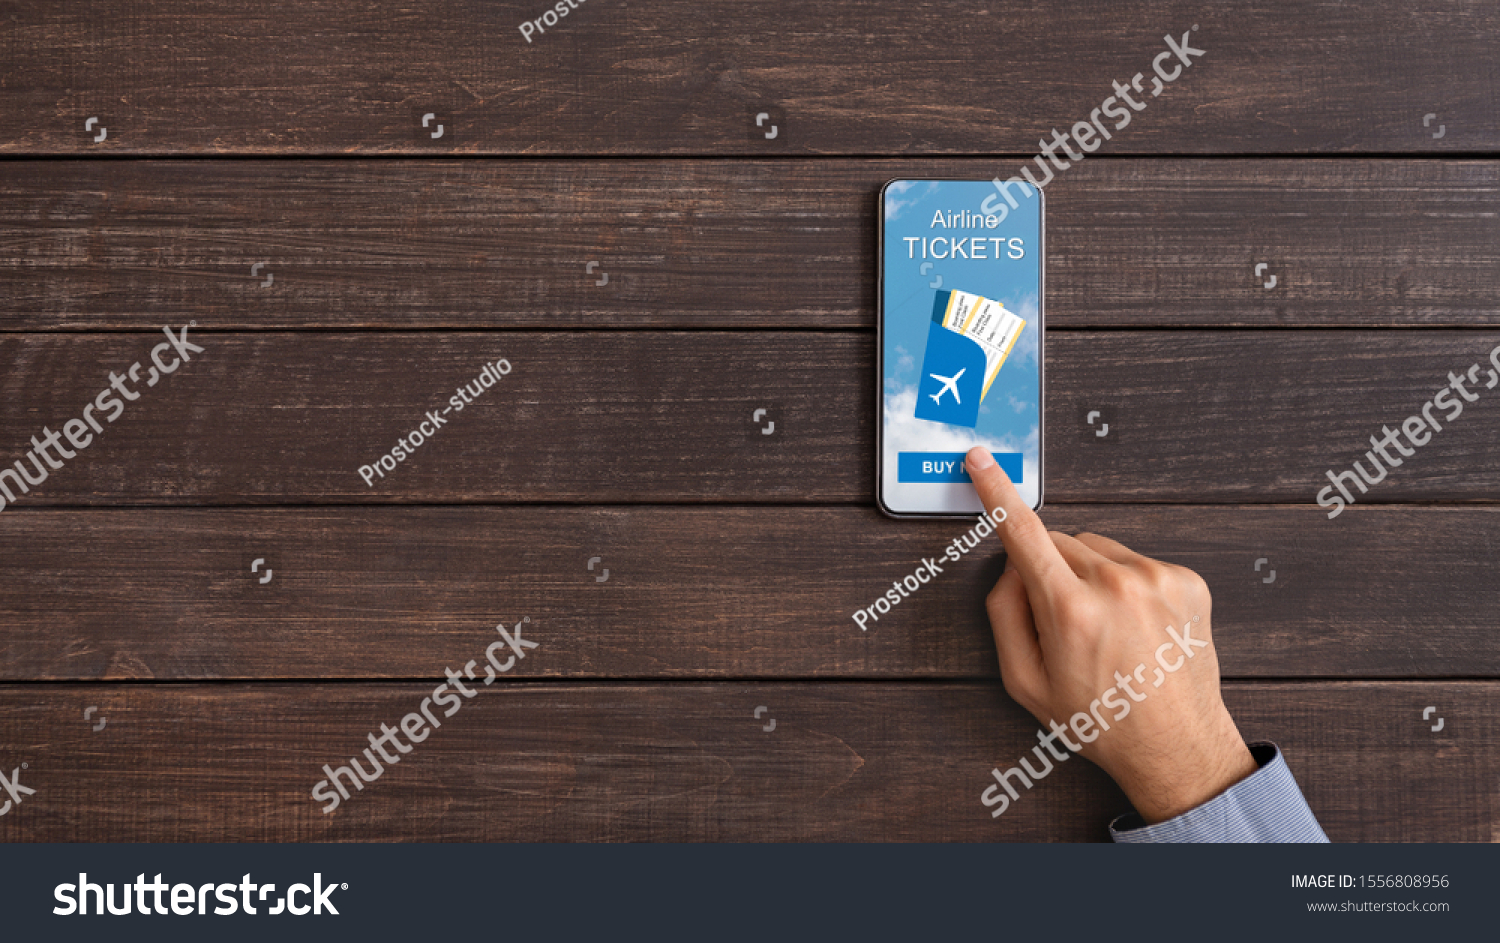 Book your flight. Man downloading application for purchasing airline tickets online on smartphone, panorama with free space on wooden background #1556808956